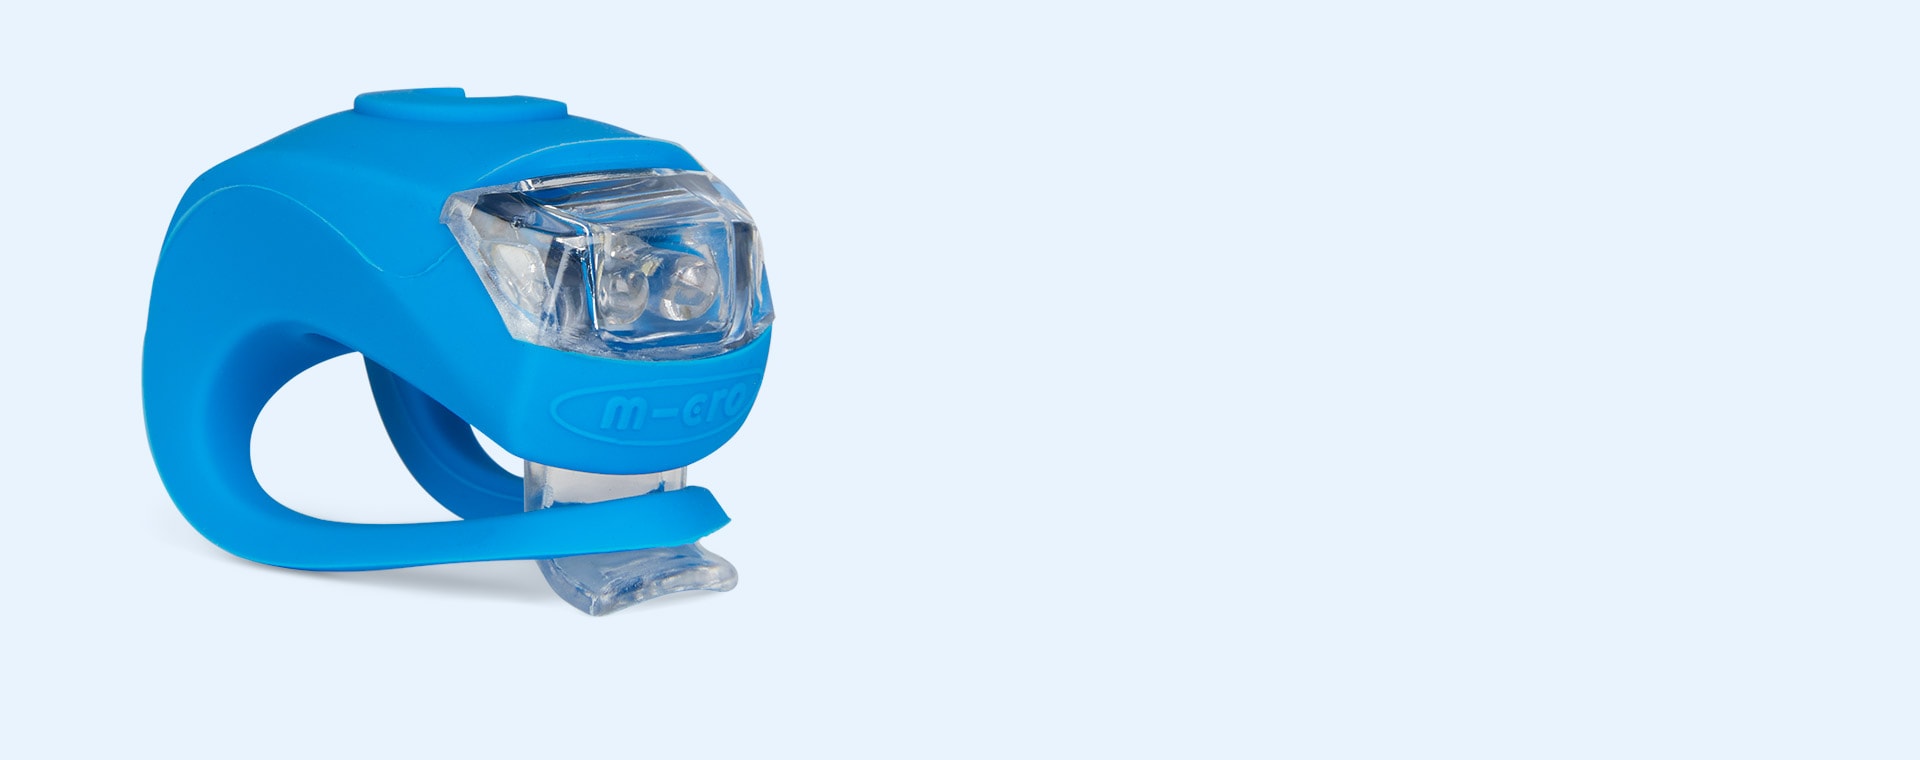 Neon Blue Micro Scooters Light